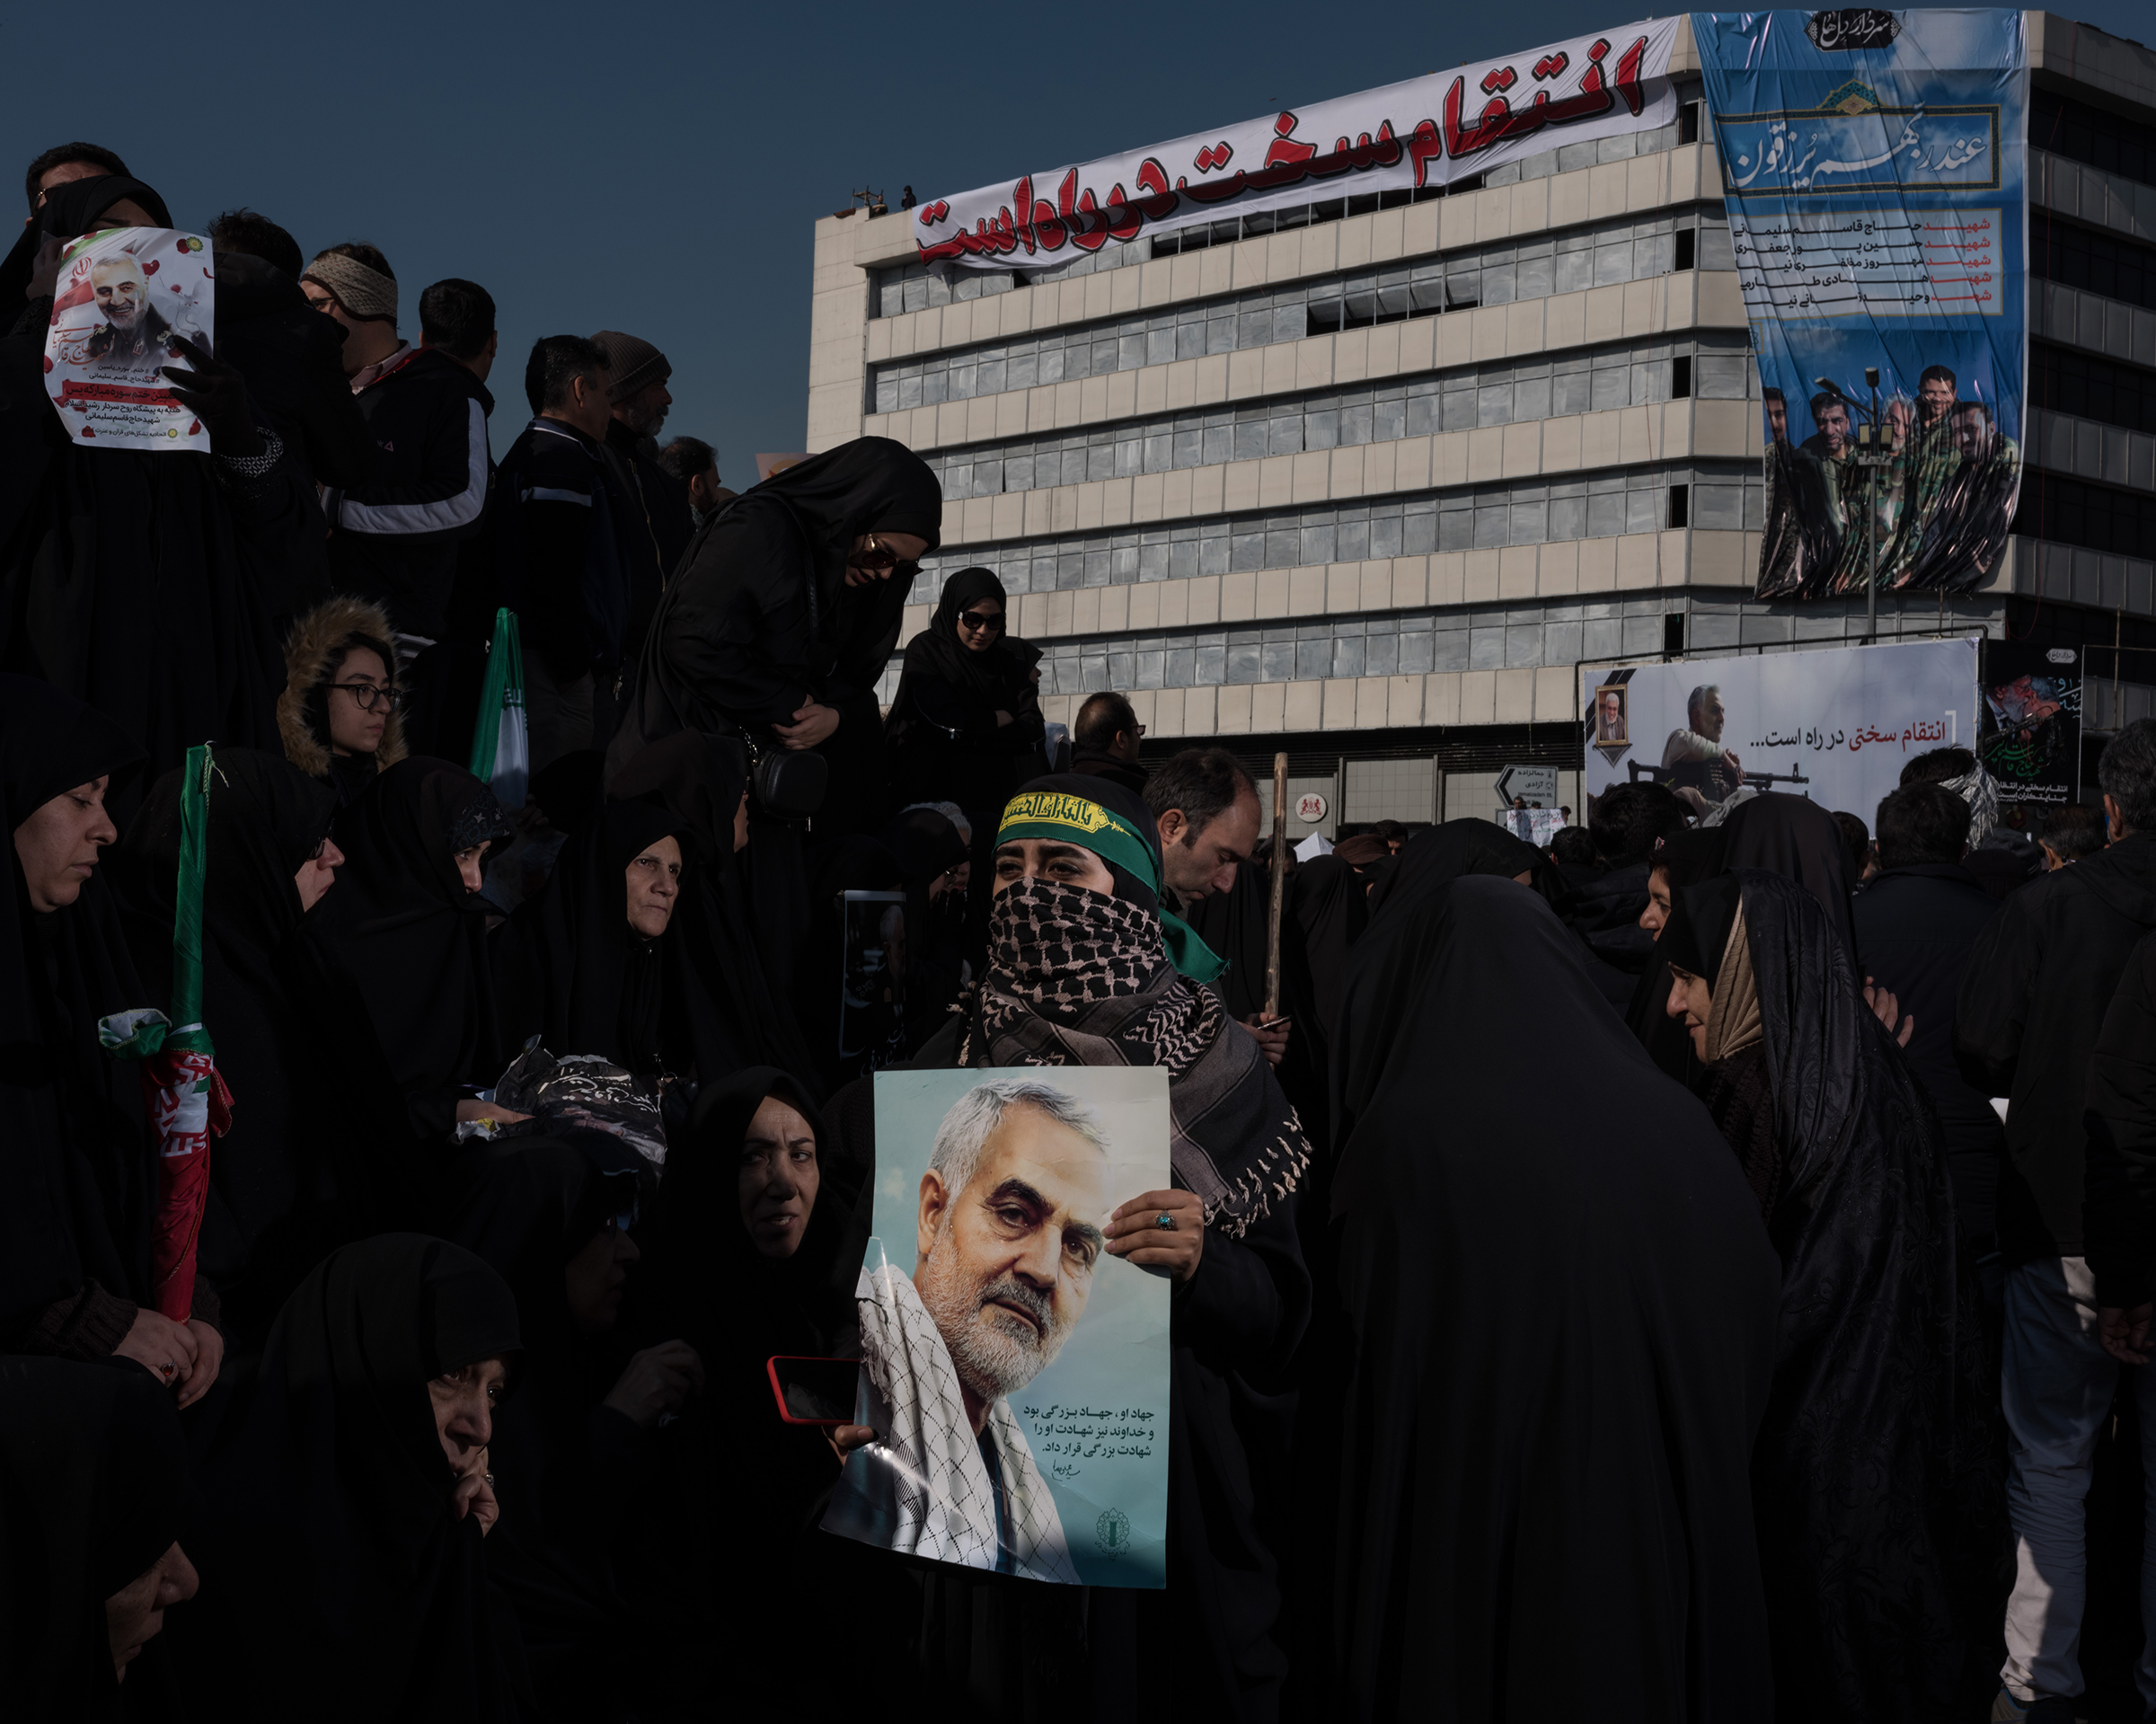 Iranians amassed in the streets of Tehran in the wake of the killing Qasem Soleimani, considered a hero by millions for leading the elite Quds Force. (Newsha Tavakolian—Magnum Photos for TIME)